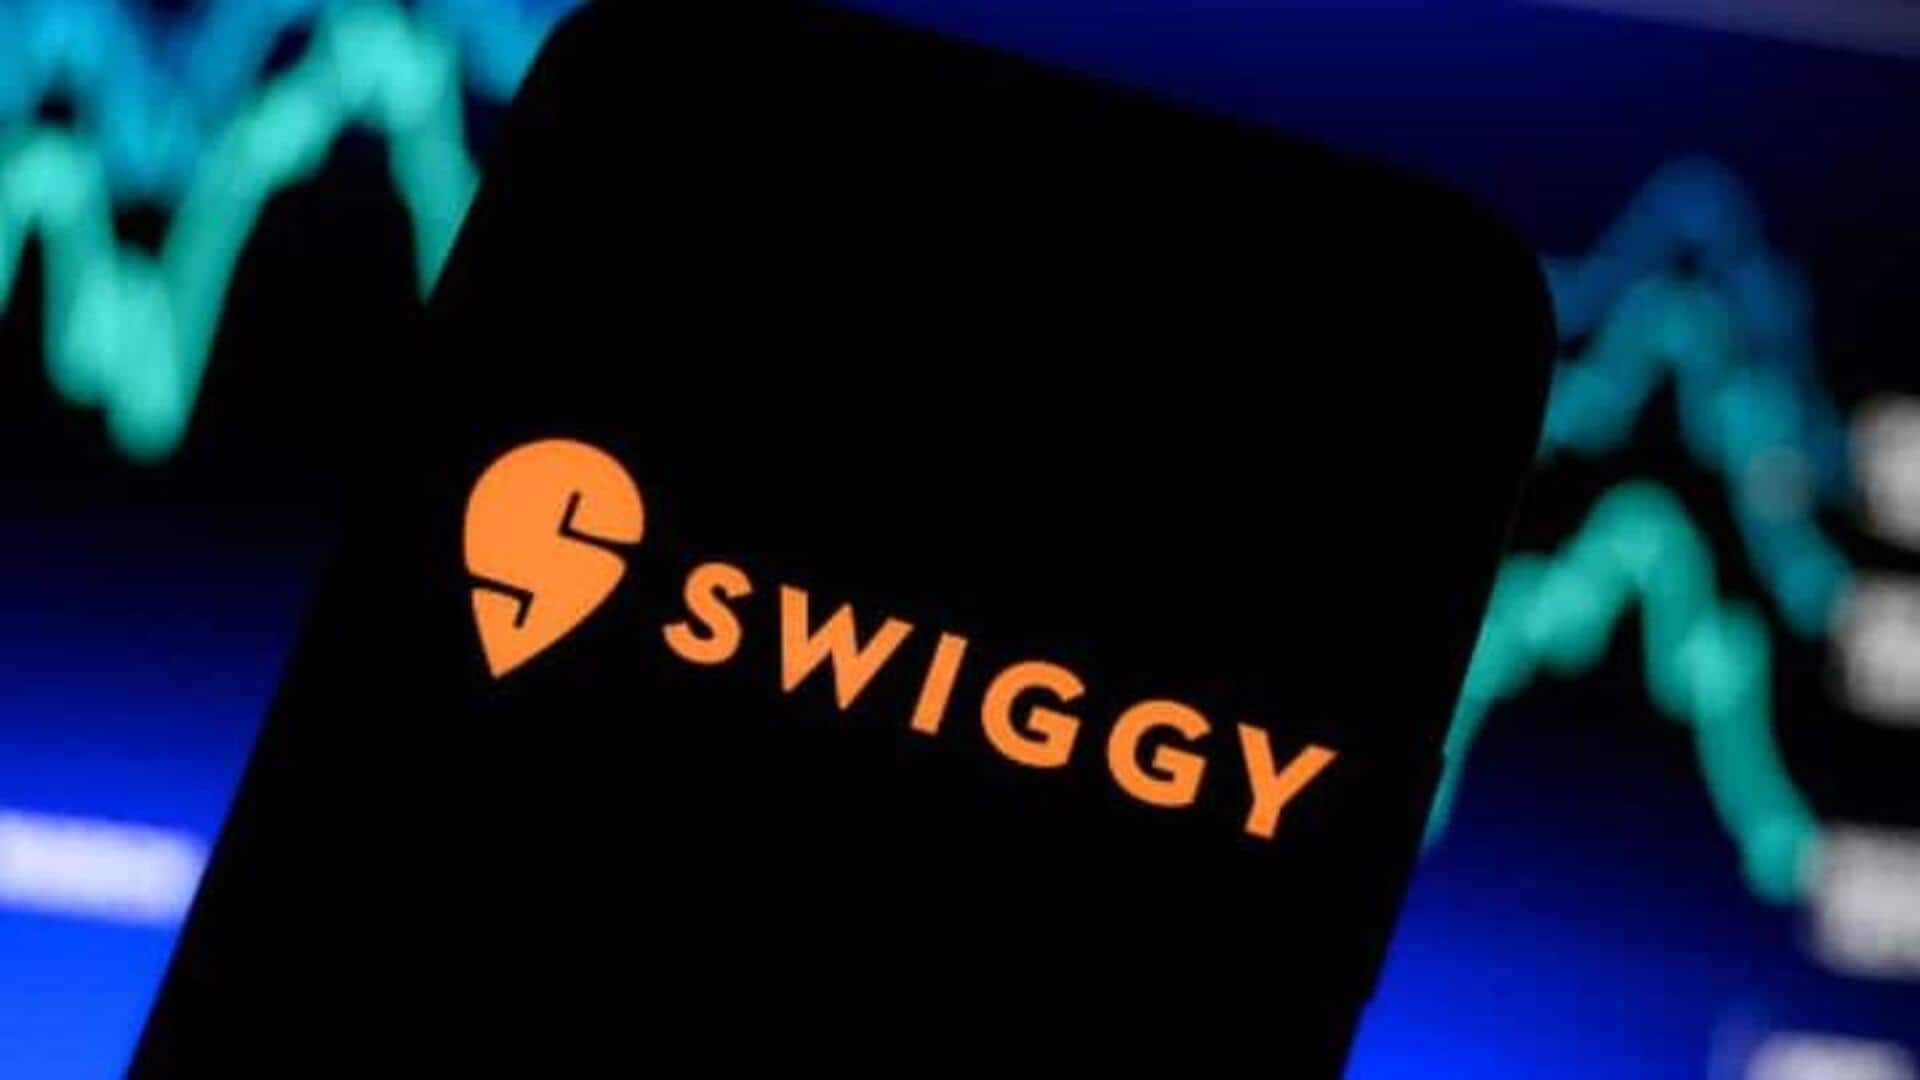 Swiggy's latest 'experiment' doubles platform fee to Rs. 10